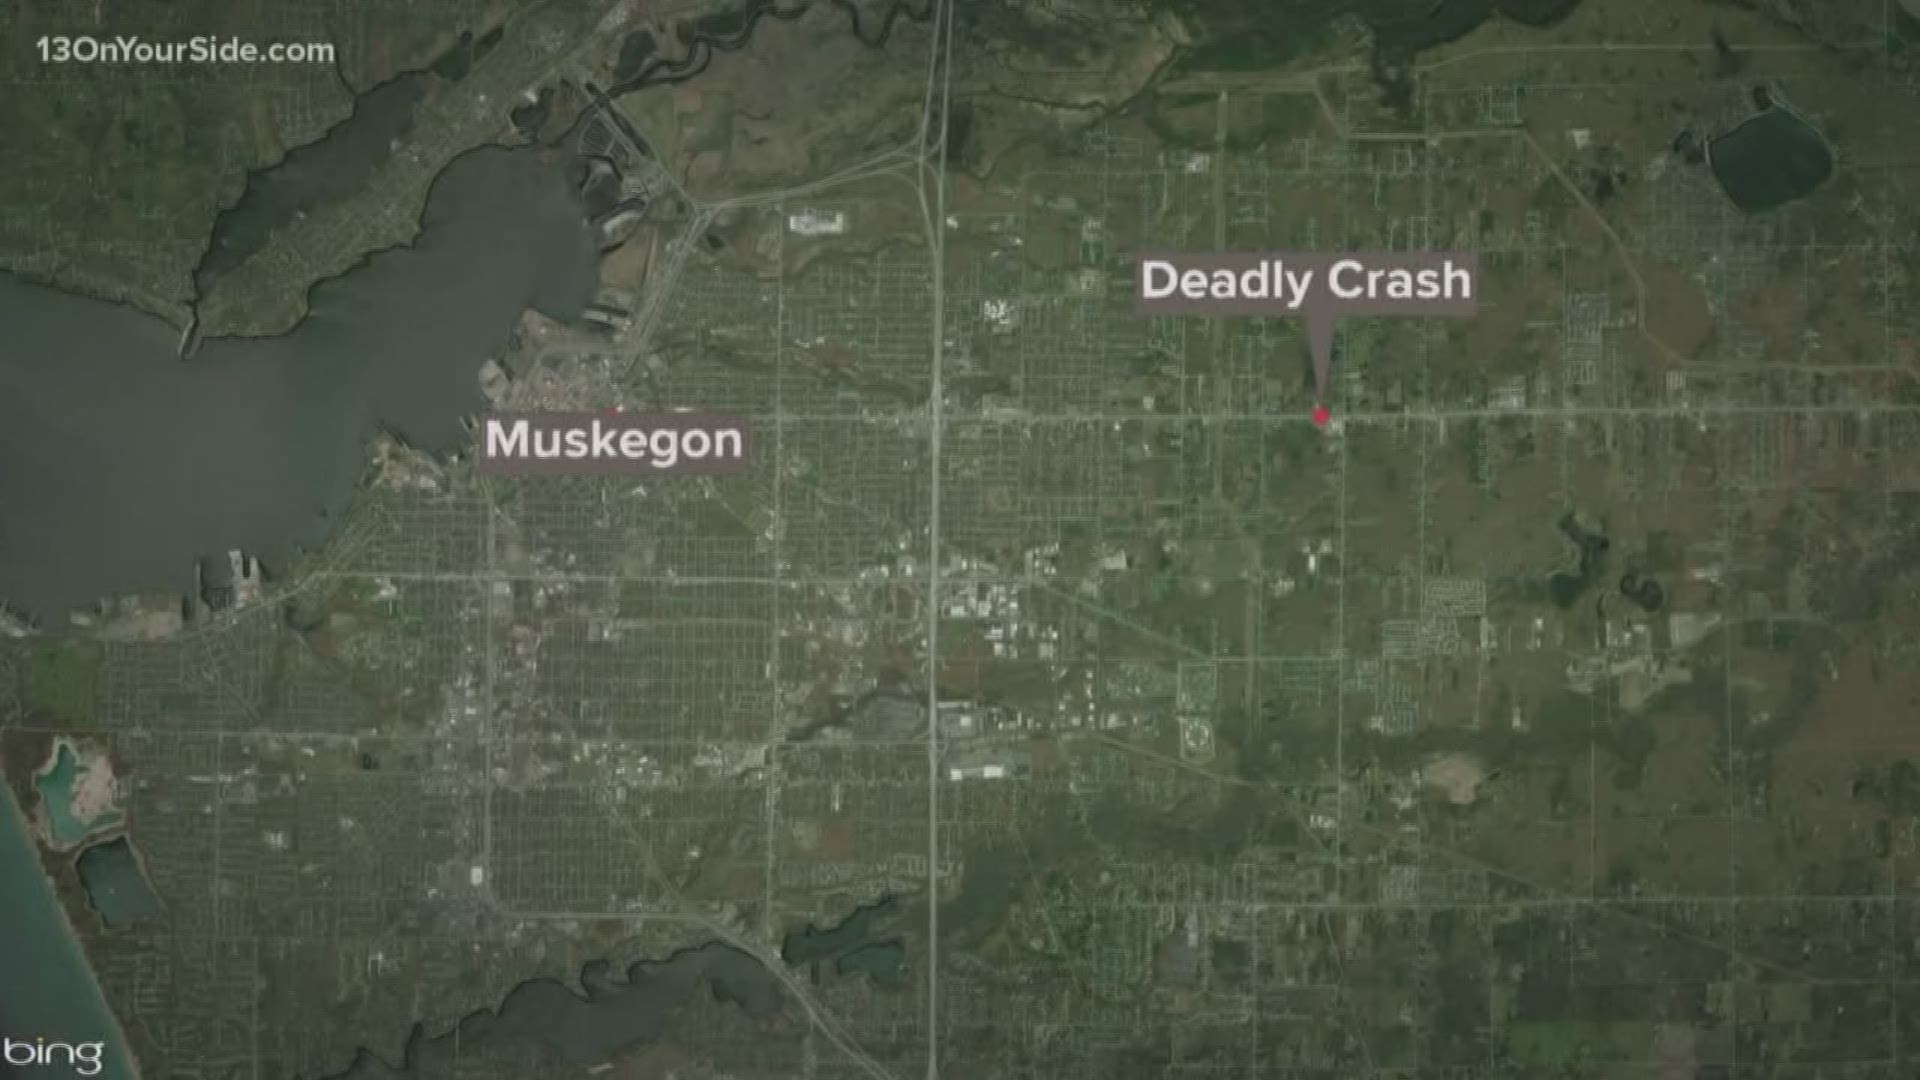 A motorcyclist died Monday afternoon after hitting a van head-on in Muskegon. Muskegon Township Police identified the man as Dean Dilts Jr., 33, from Casnovia Township. Witnesses at the scene said Dilts left the normal travel lanes on westbound Apple and went into the middle turn lane to pass a pickup truck.